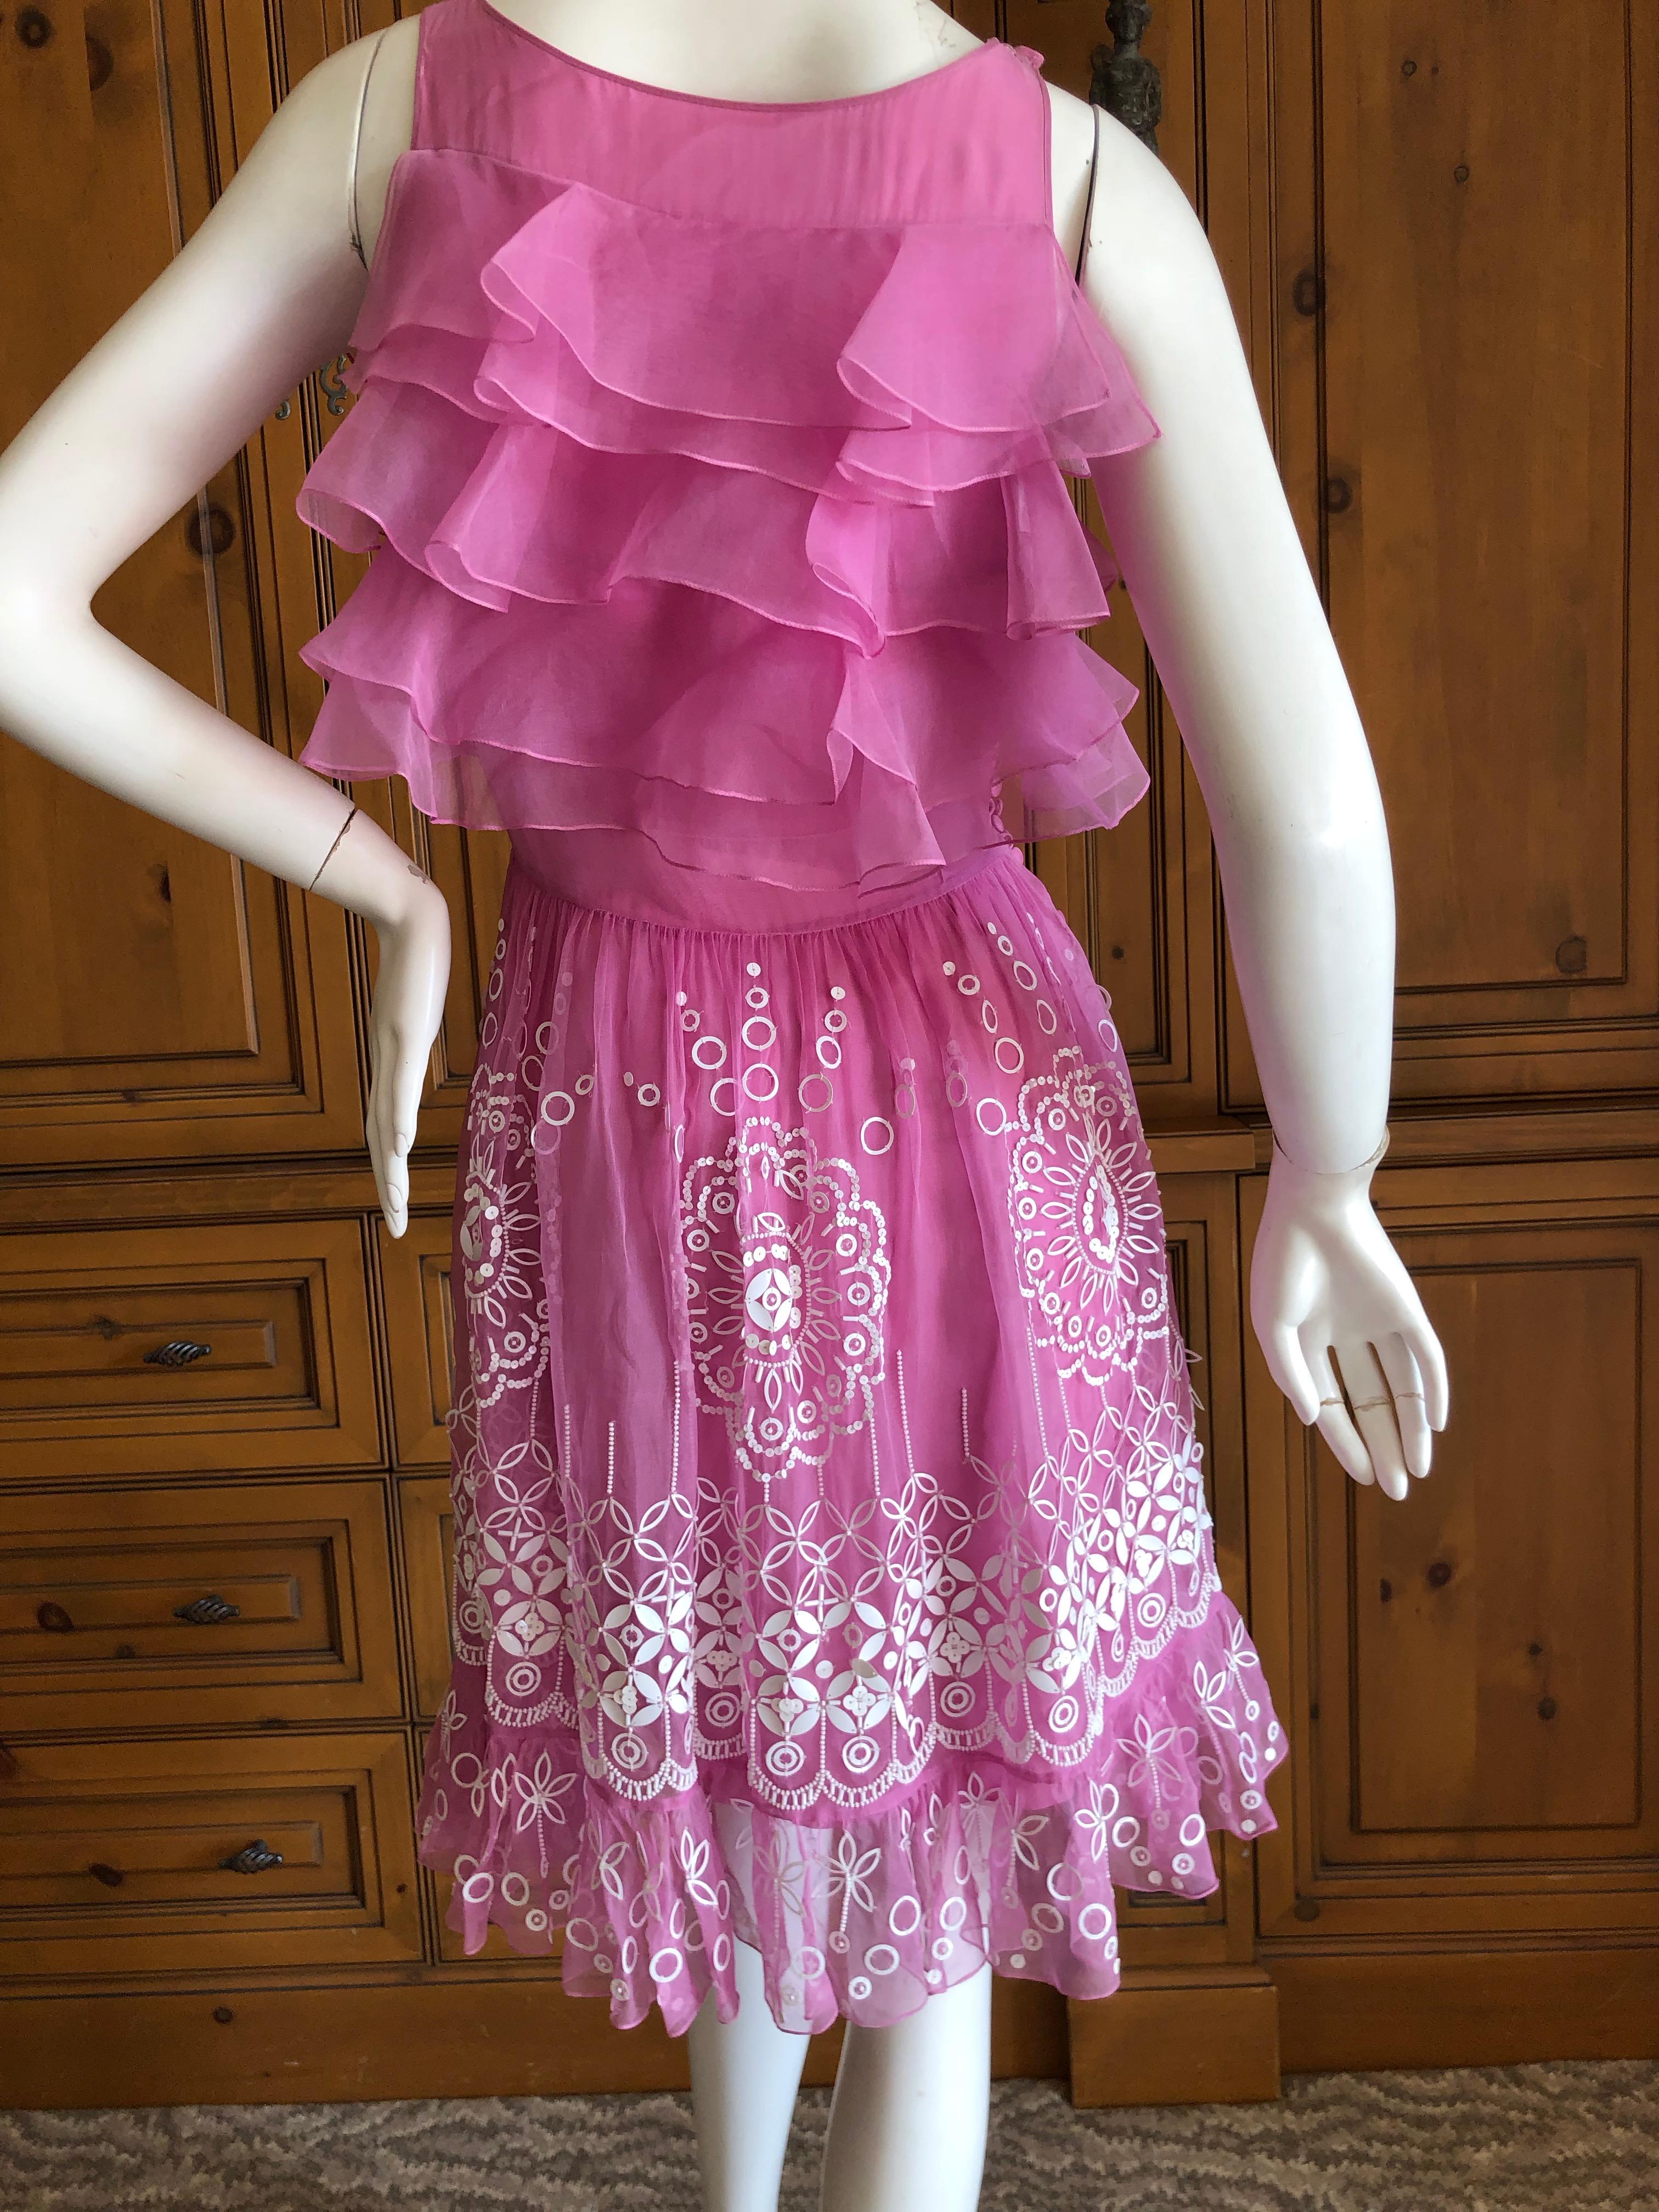 Christian Dior by John Galliano Pink Silk Dress with White Embellishments For Sale 3